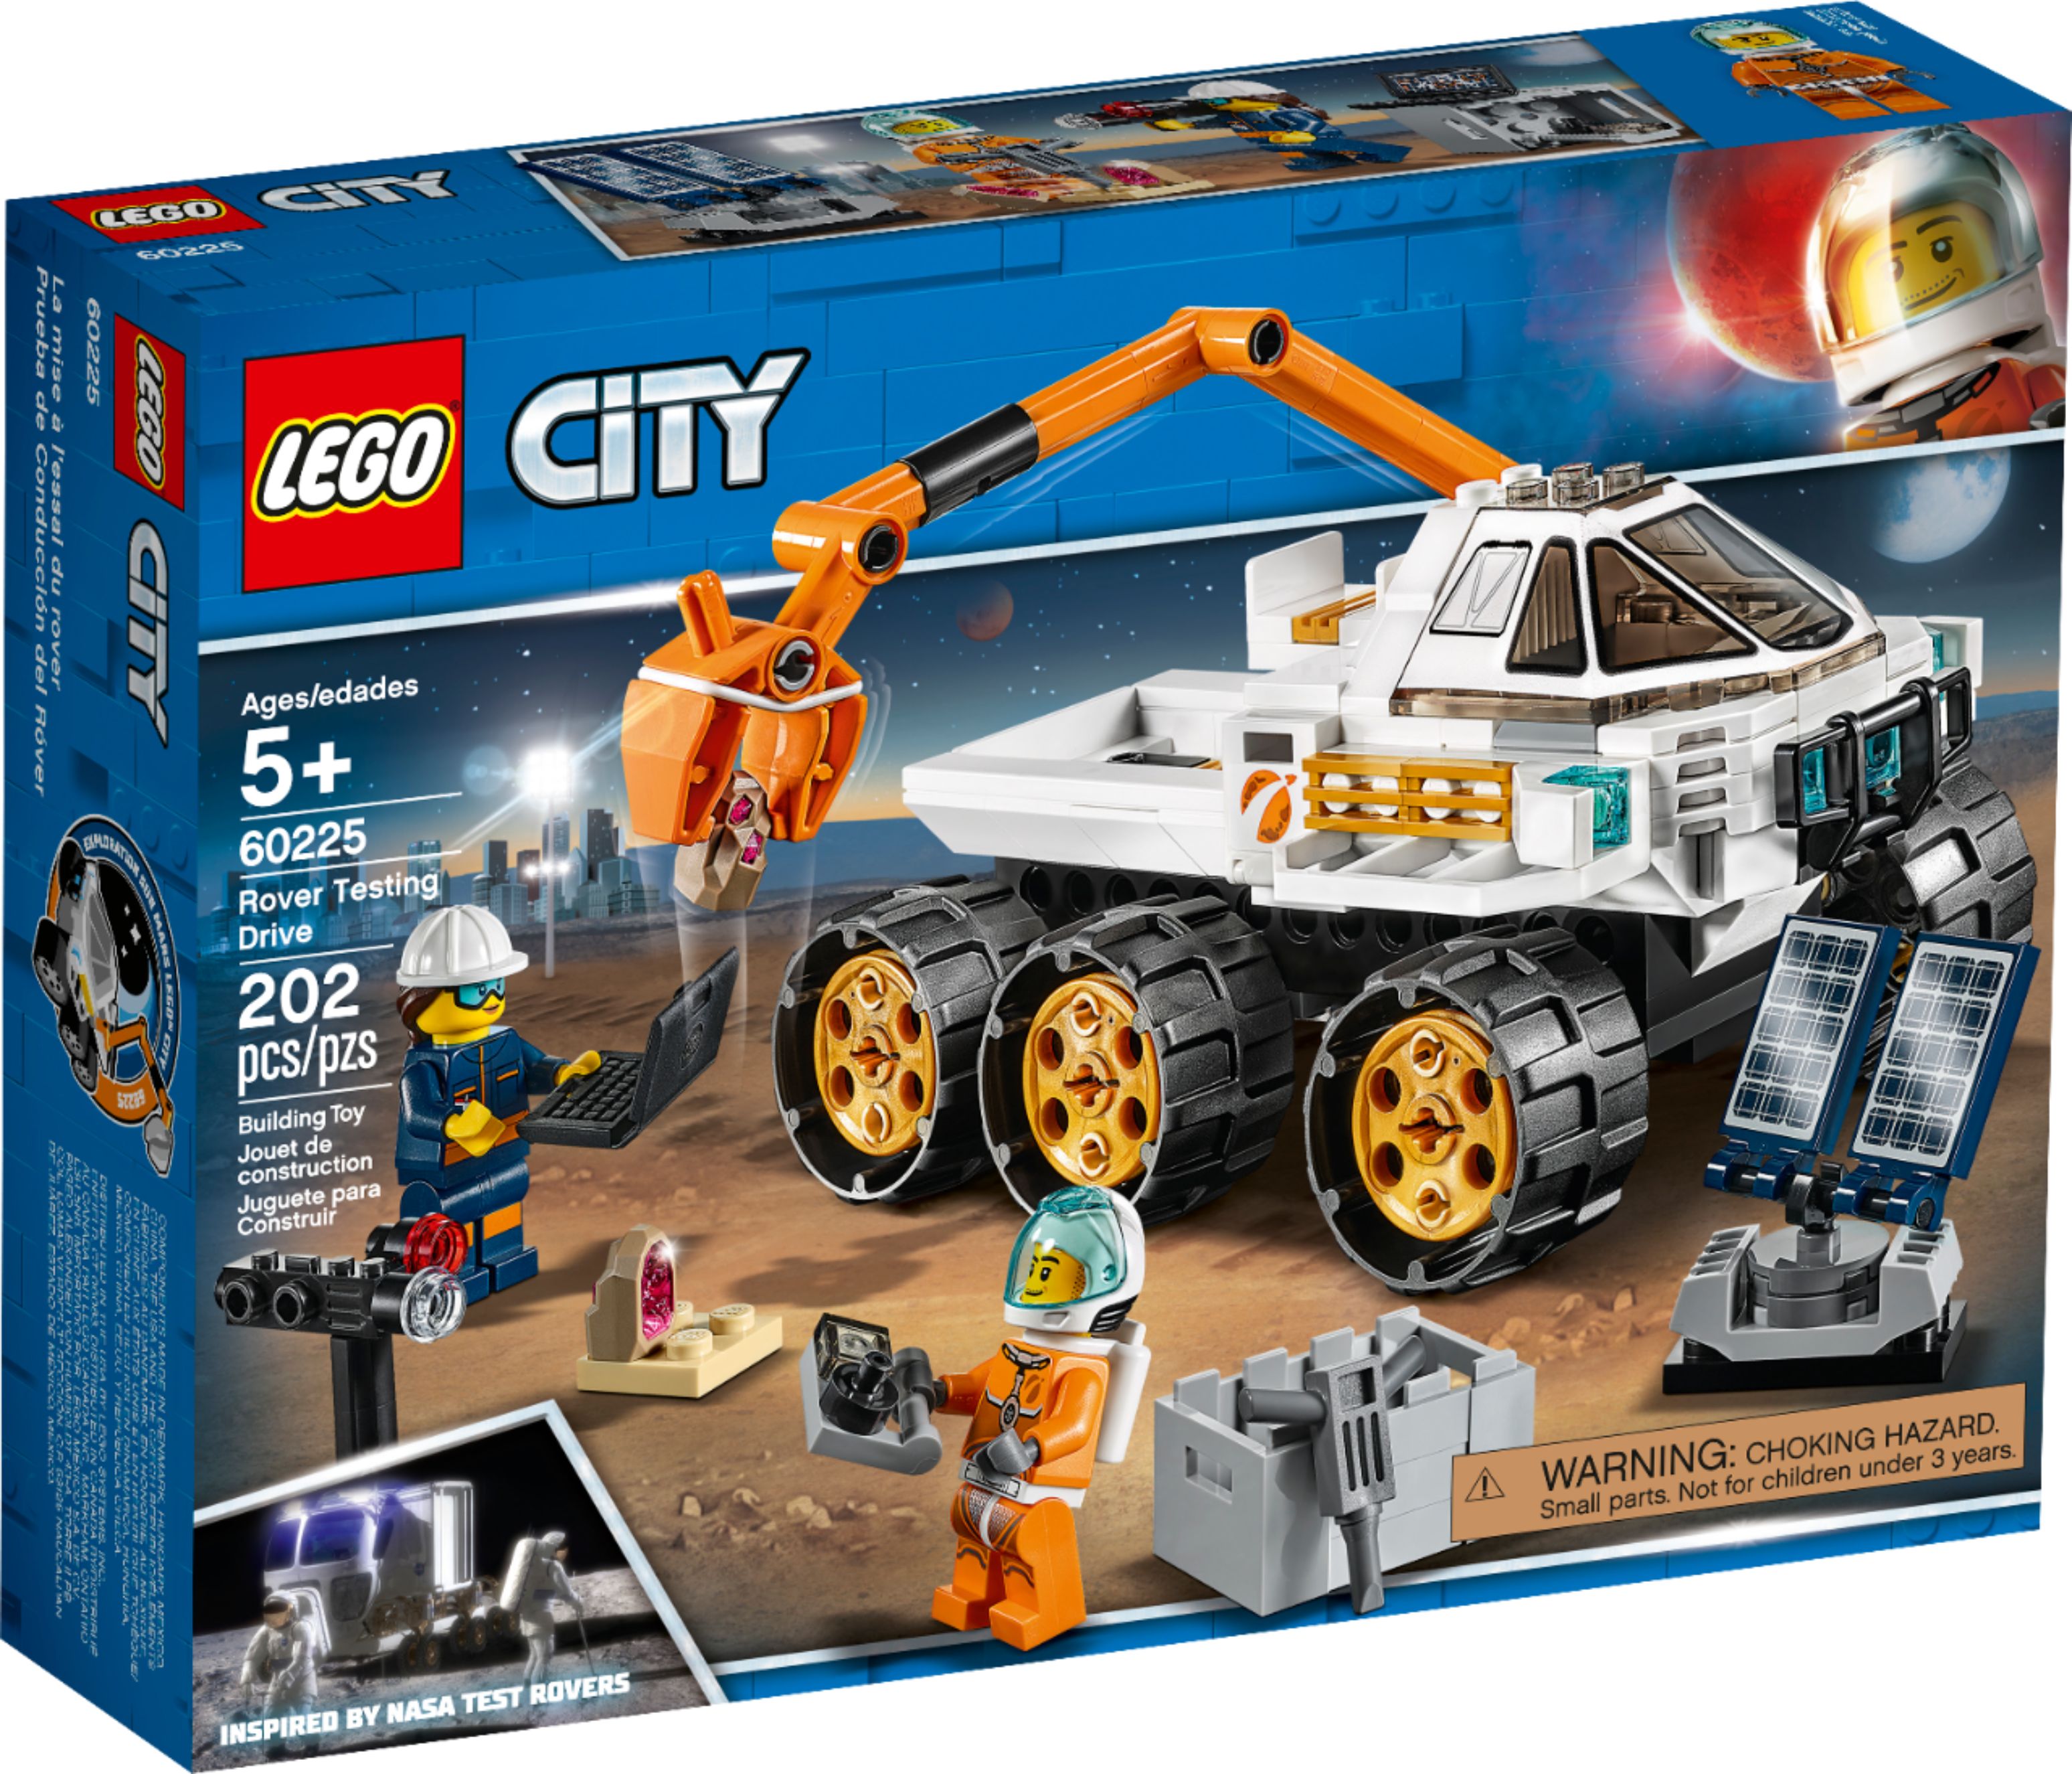 Lego City Rover Testing Drive 60225 6251704